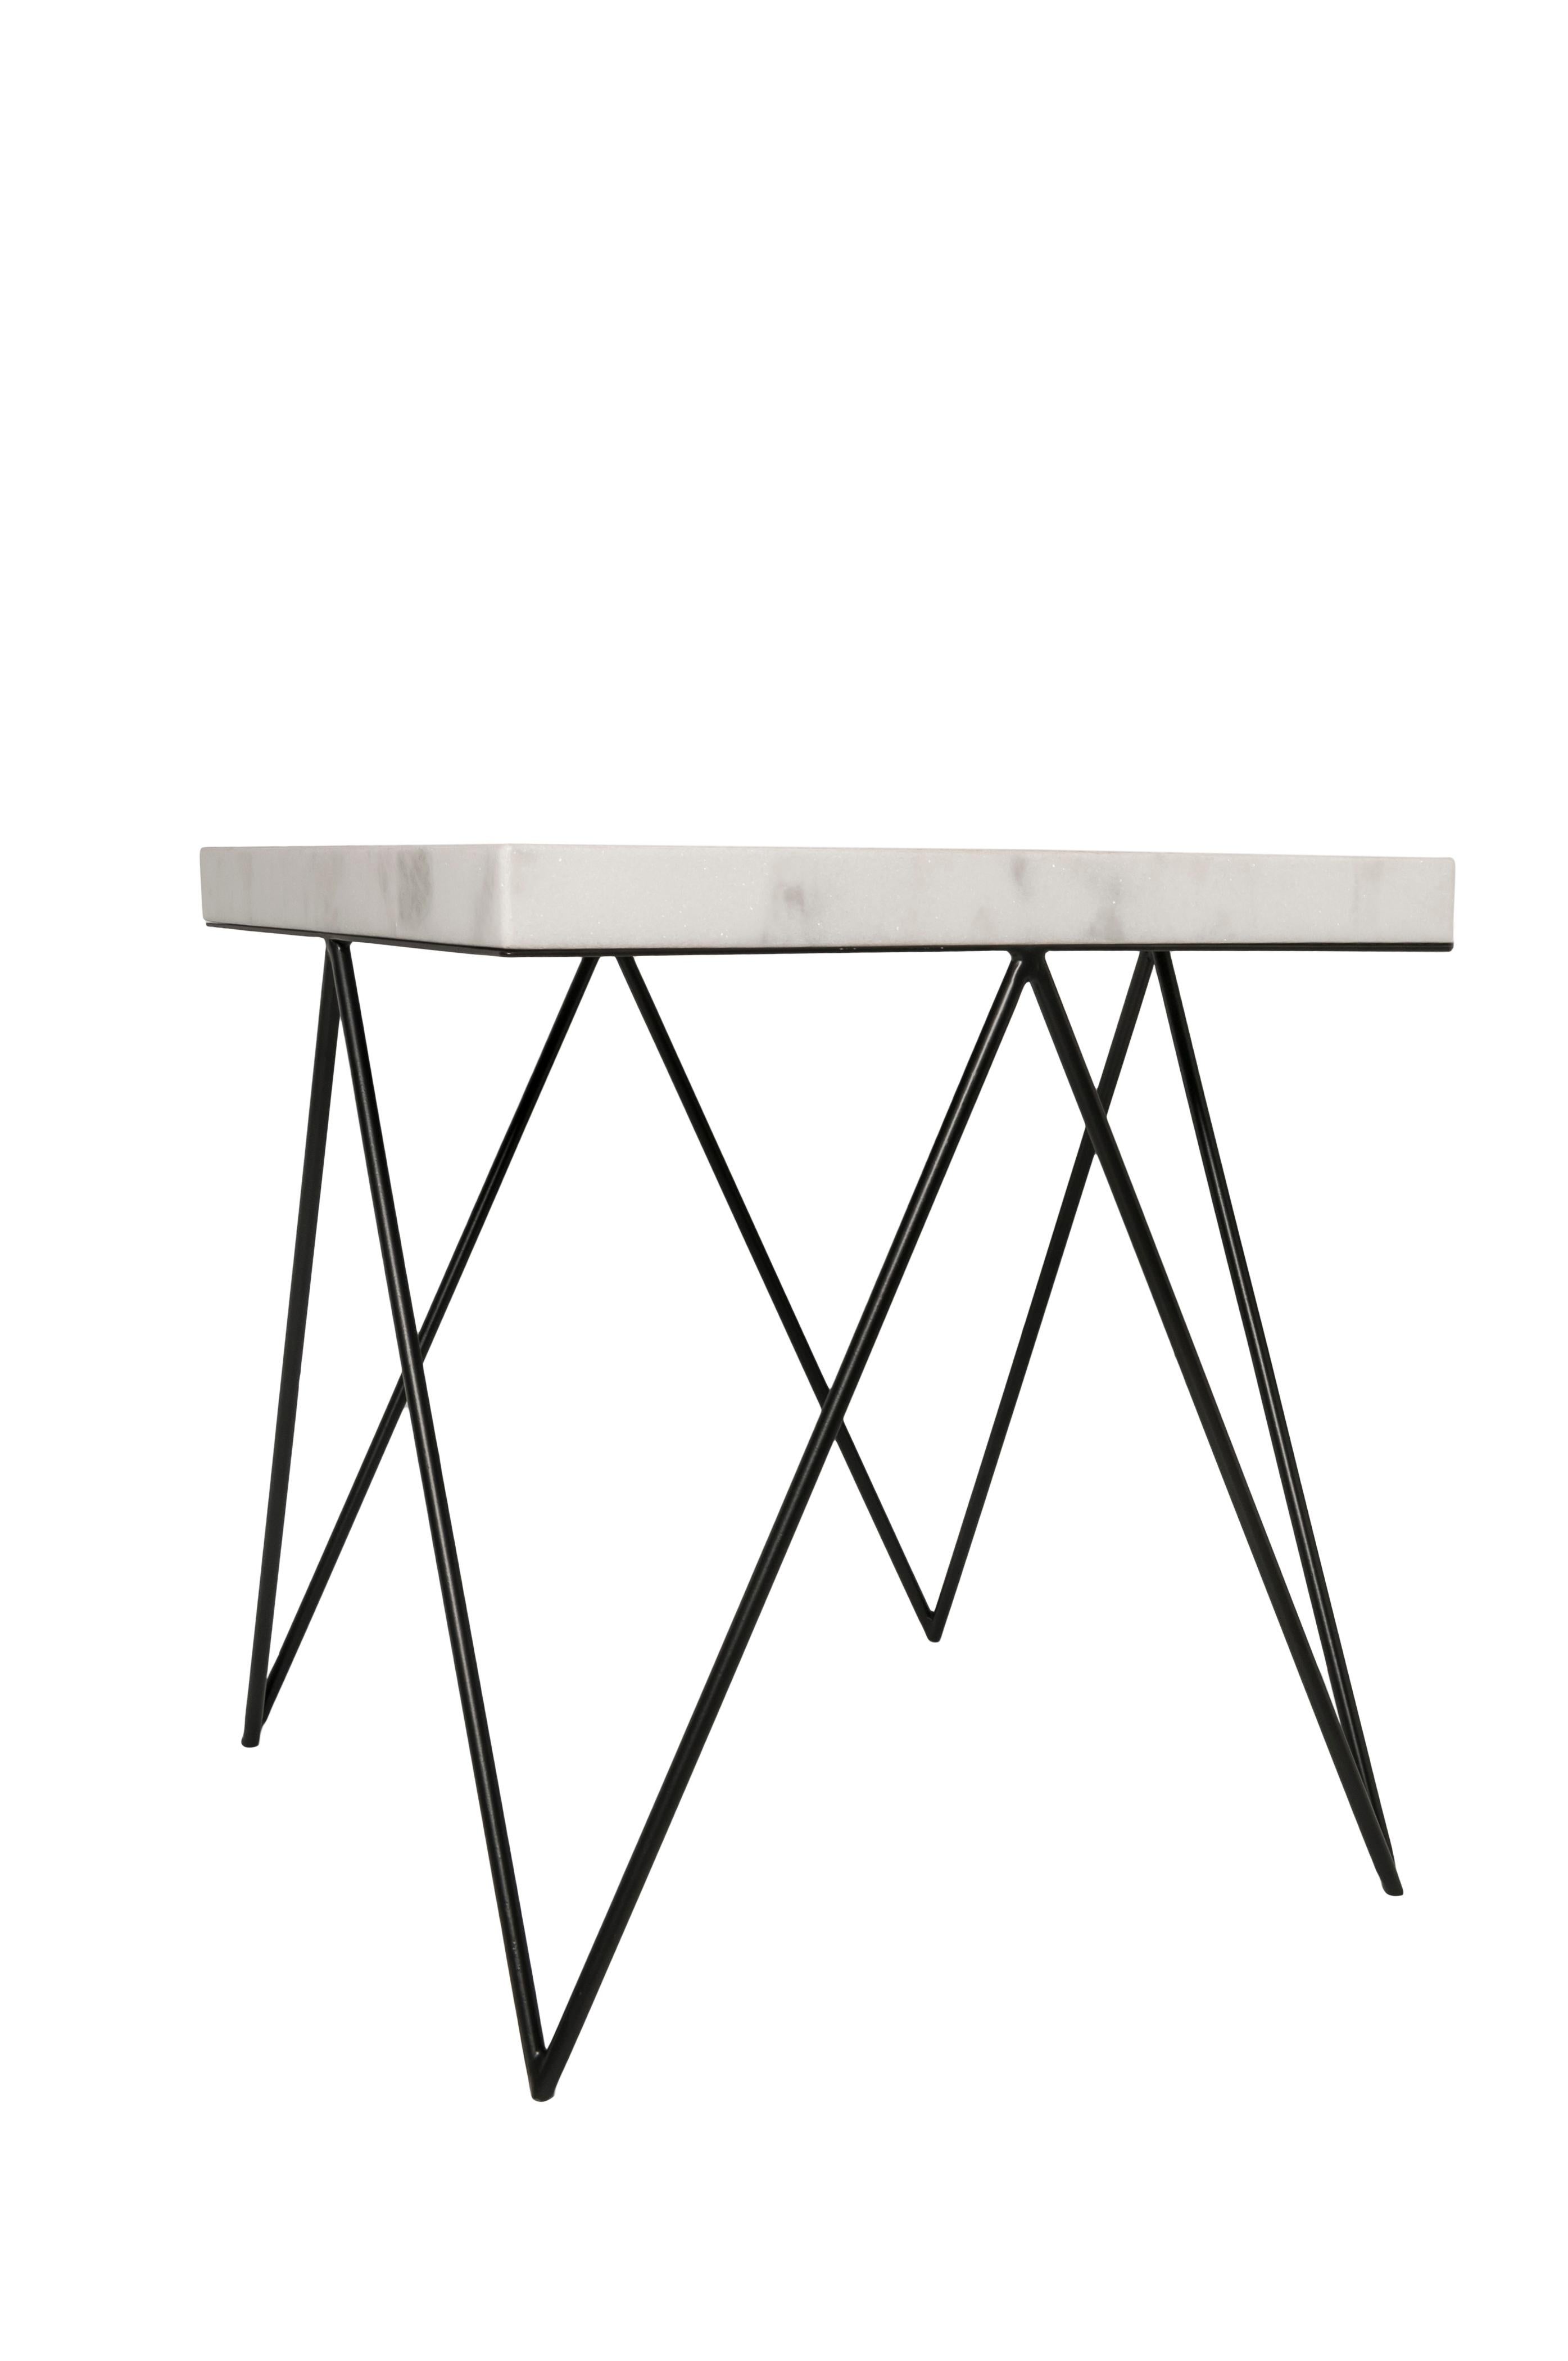 Post-Modern Chakra Table by Roberta Rampazzo For Sale